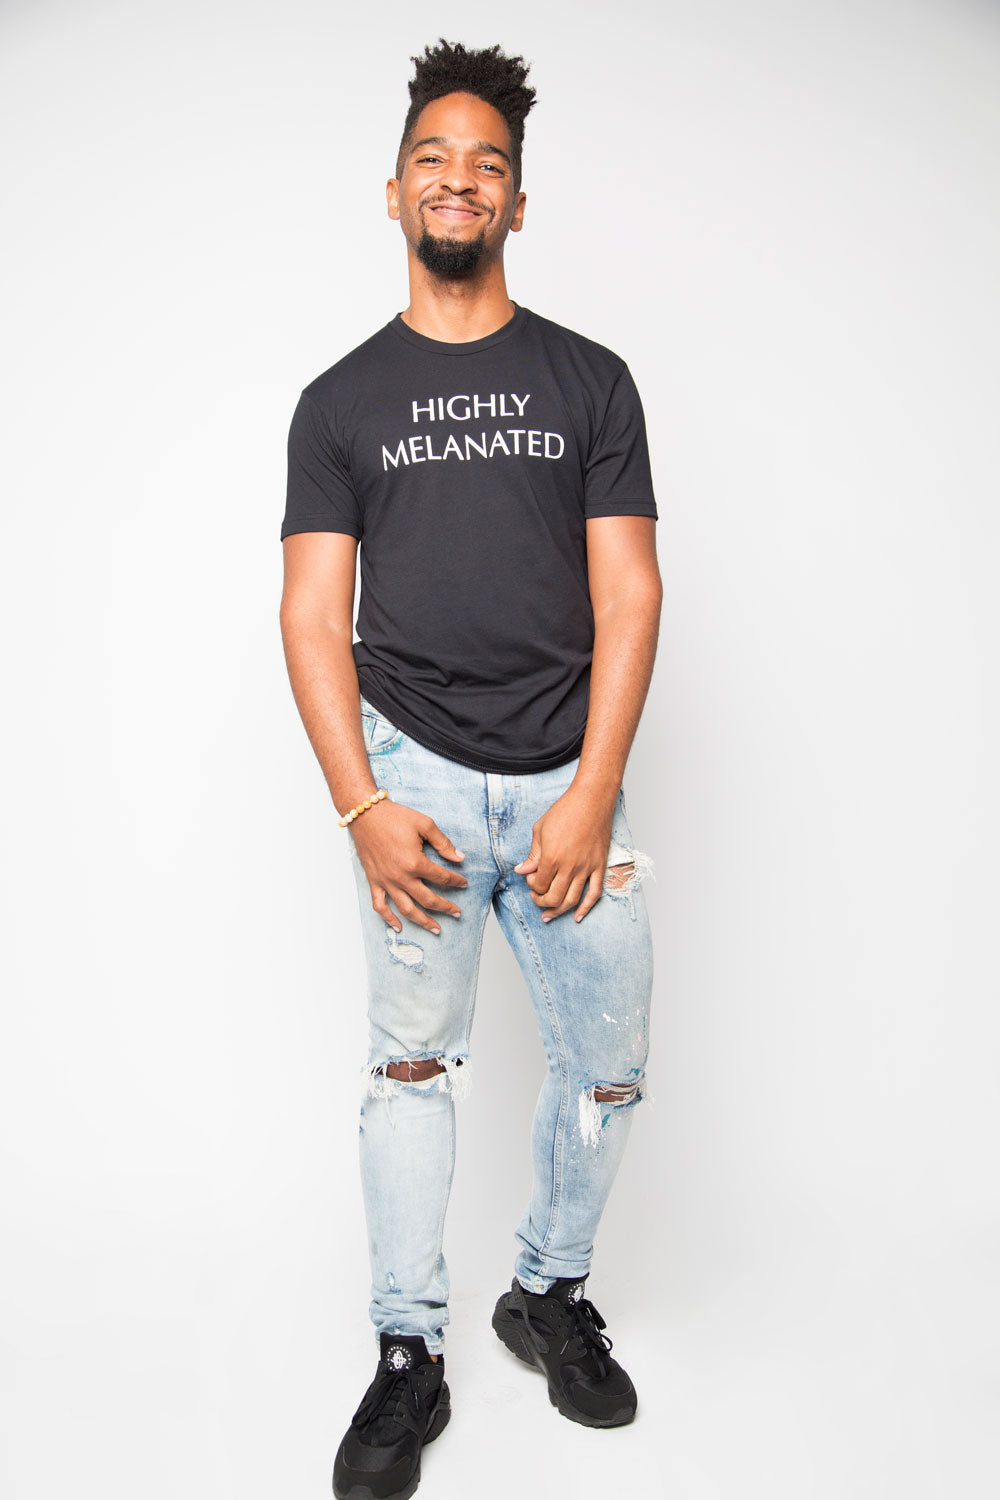 Highly Melanated Shirt in Black - Trunk Series